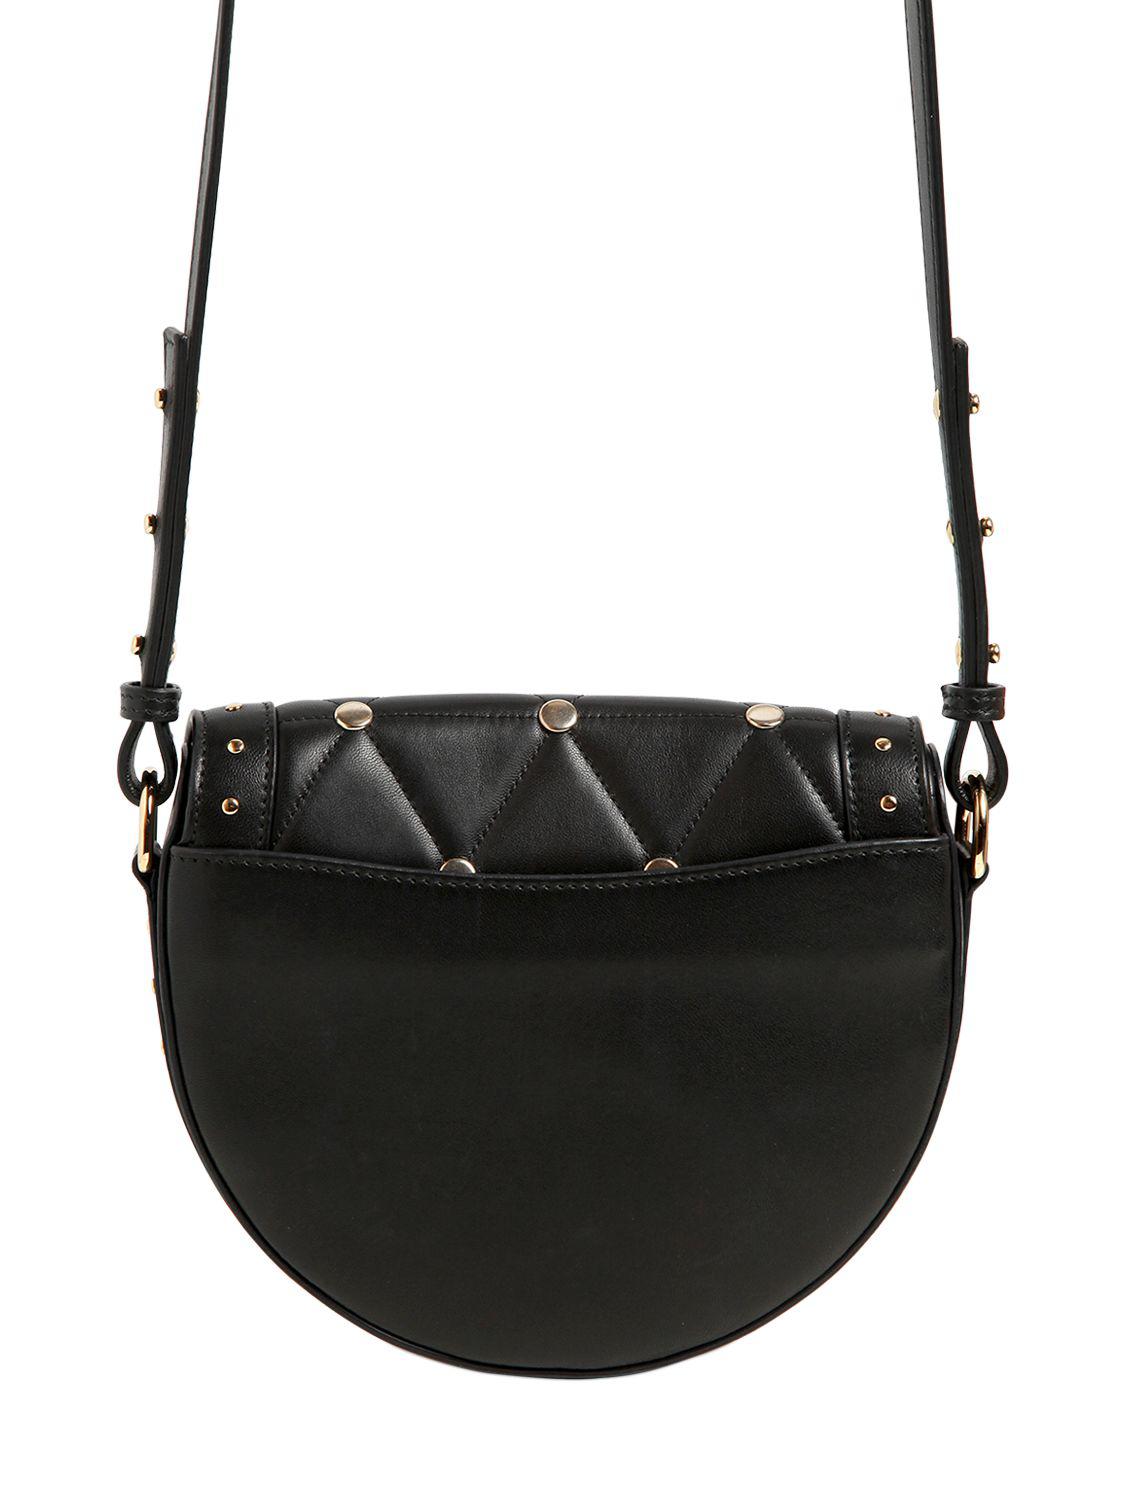 Balmain Small Quilted Leather Bag W/ Studs in Black - Lyst